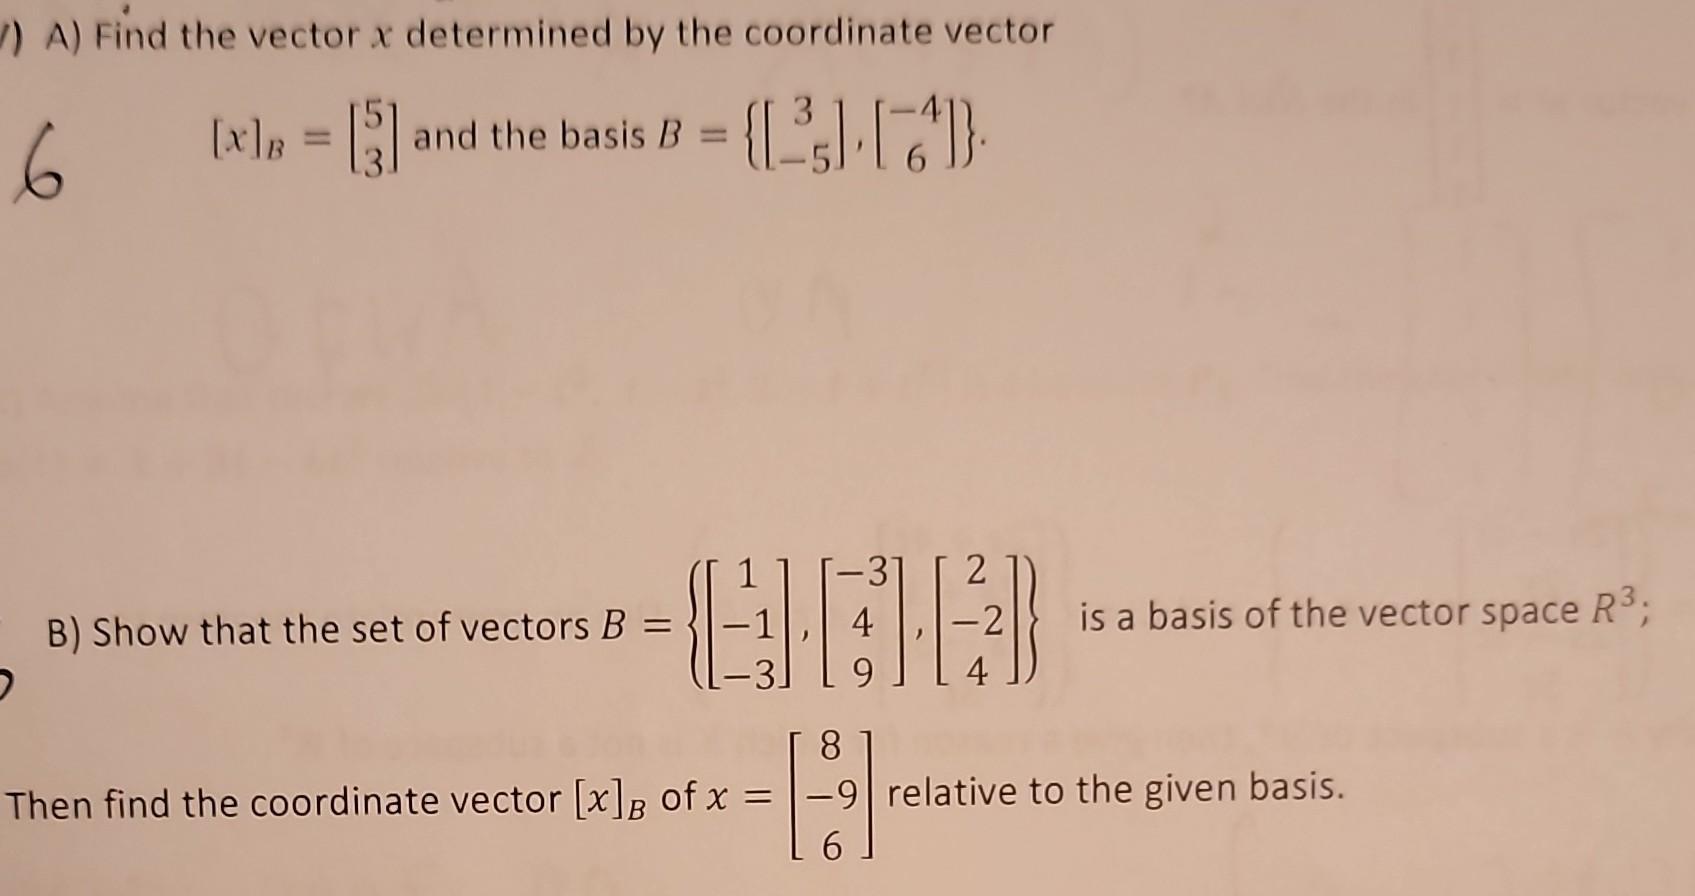 ) A) Find the vector x determined by the coordinate vector 6 [x] = [3] and the basis B = {[][7]} B) Show that